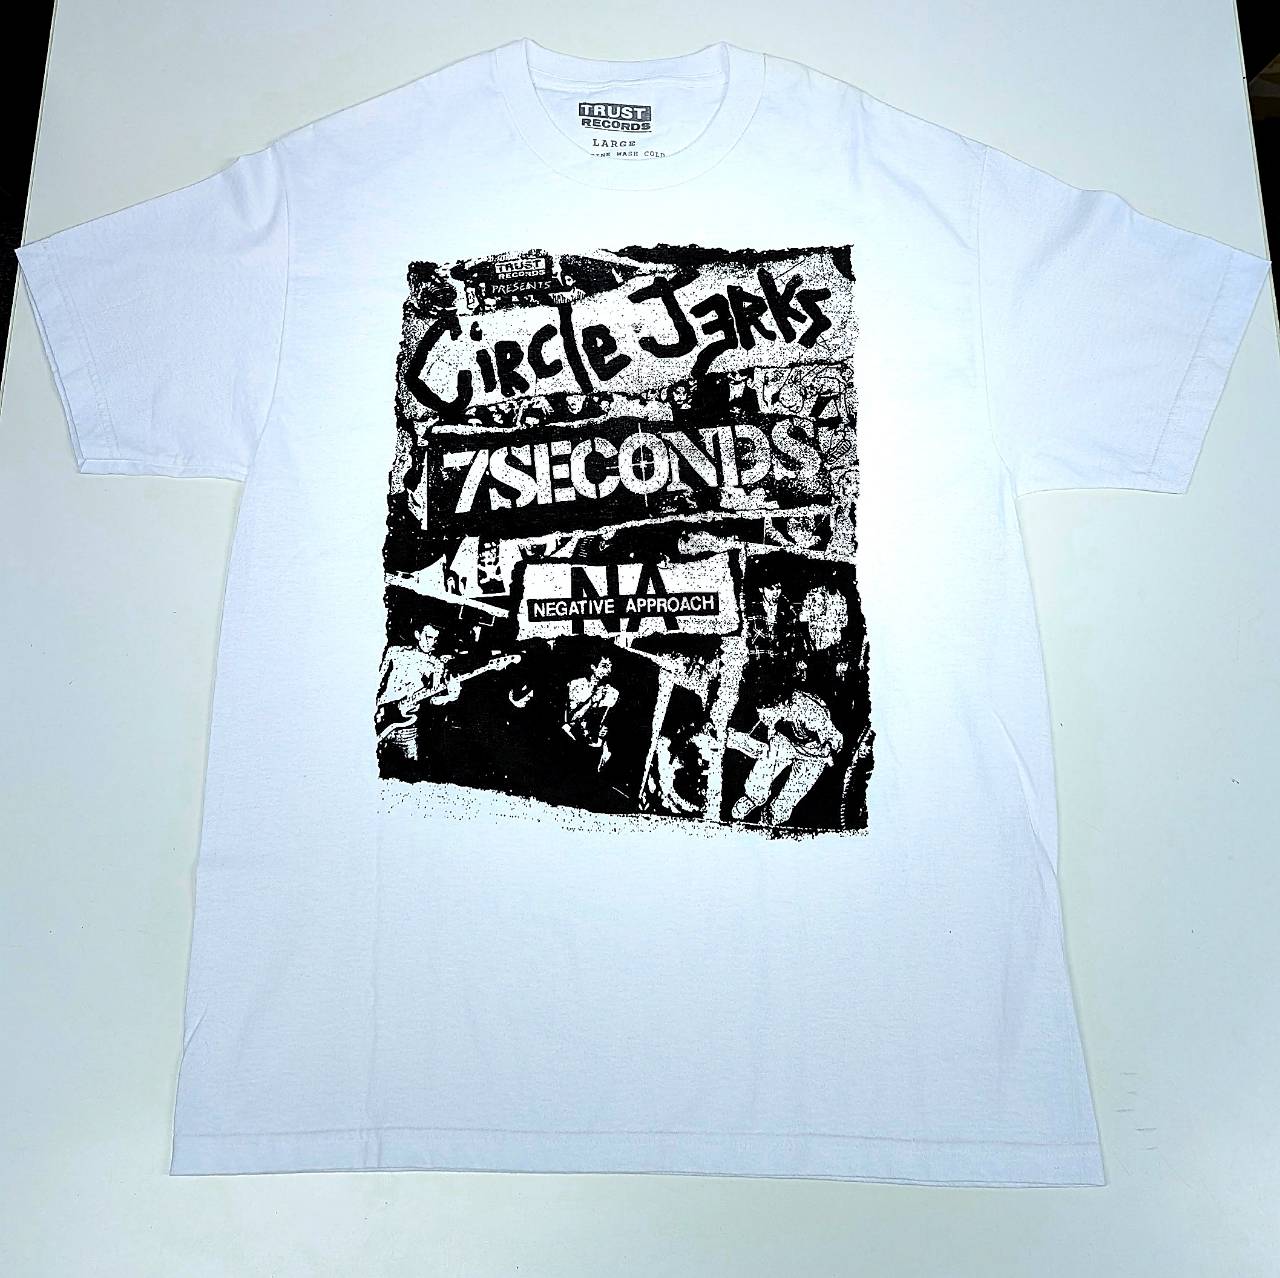 T-SHIRTS / CIRCLE JERKS/7 SECONDS/NEGATIVE APPROACH 2022 NORTH AMERICAN TOUR FLYER T